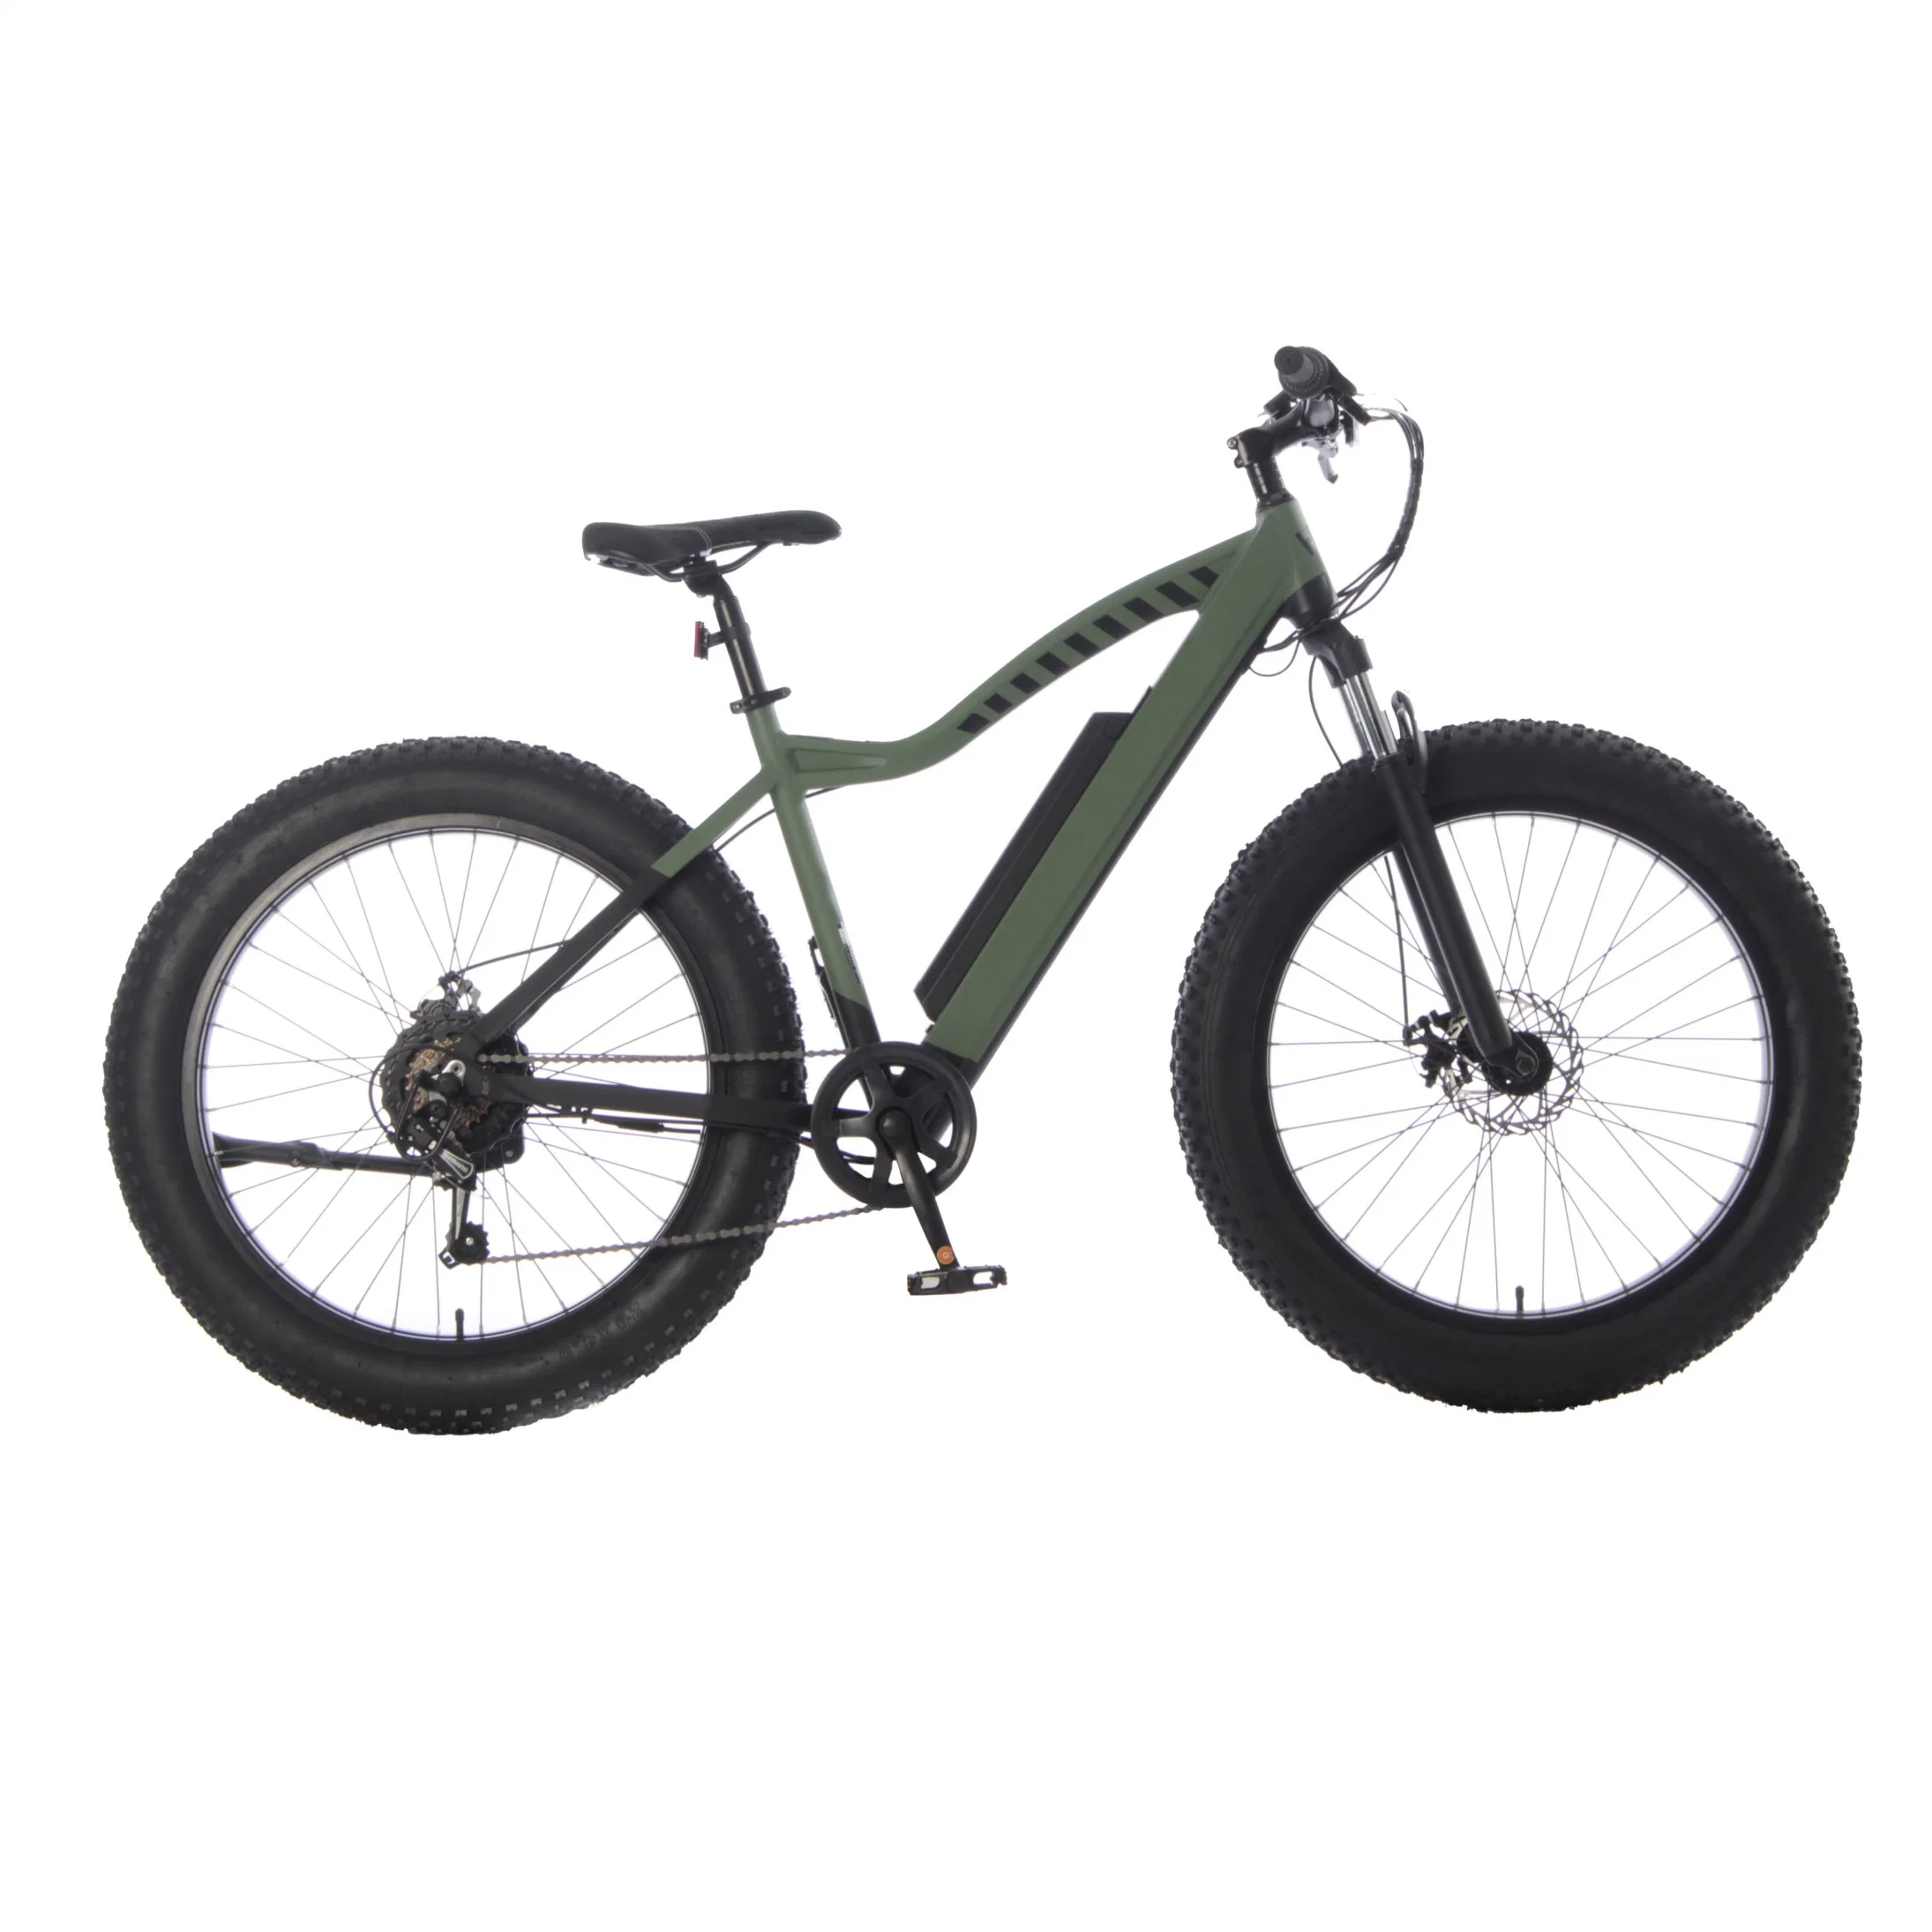 26 Inch Best Design Cheap Electric Fat Bike off Road with Front Fork Suspension Electric Mountain Dirt Bike